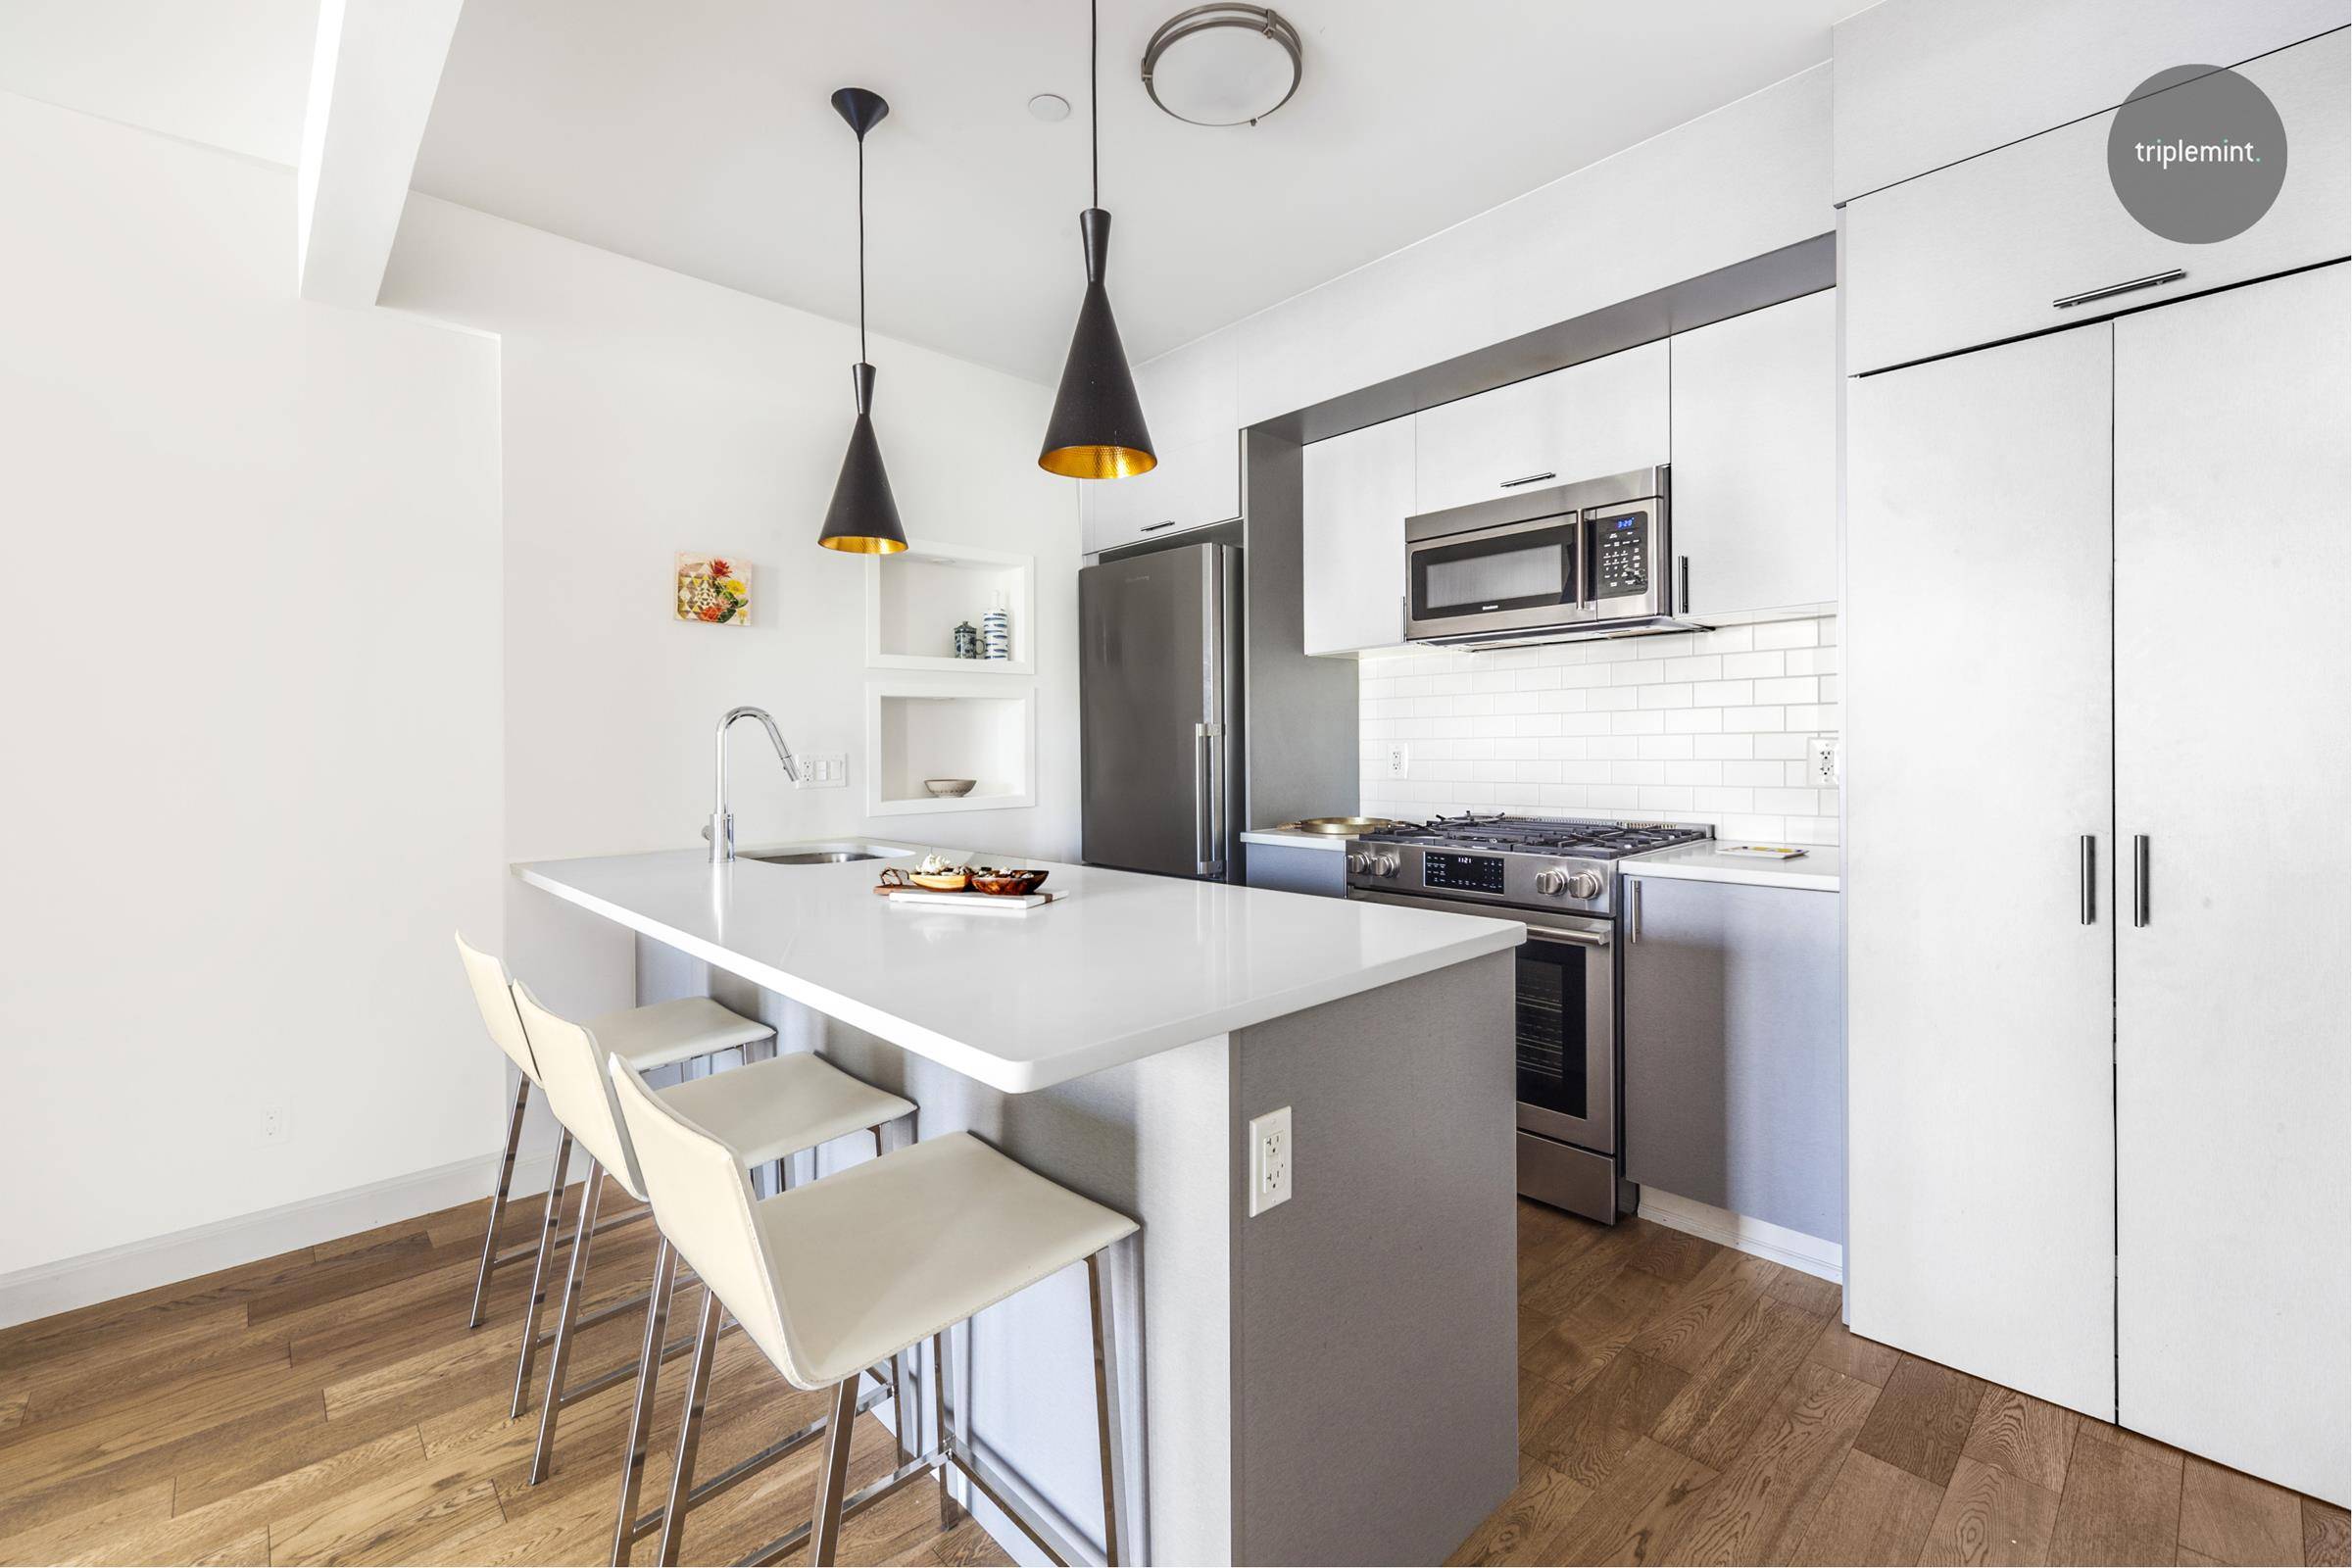 Welcome home to this modern 1 bedroom condo in a newly built boutique building nestled on the cusp of Greenpoint and Williamsburg !